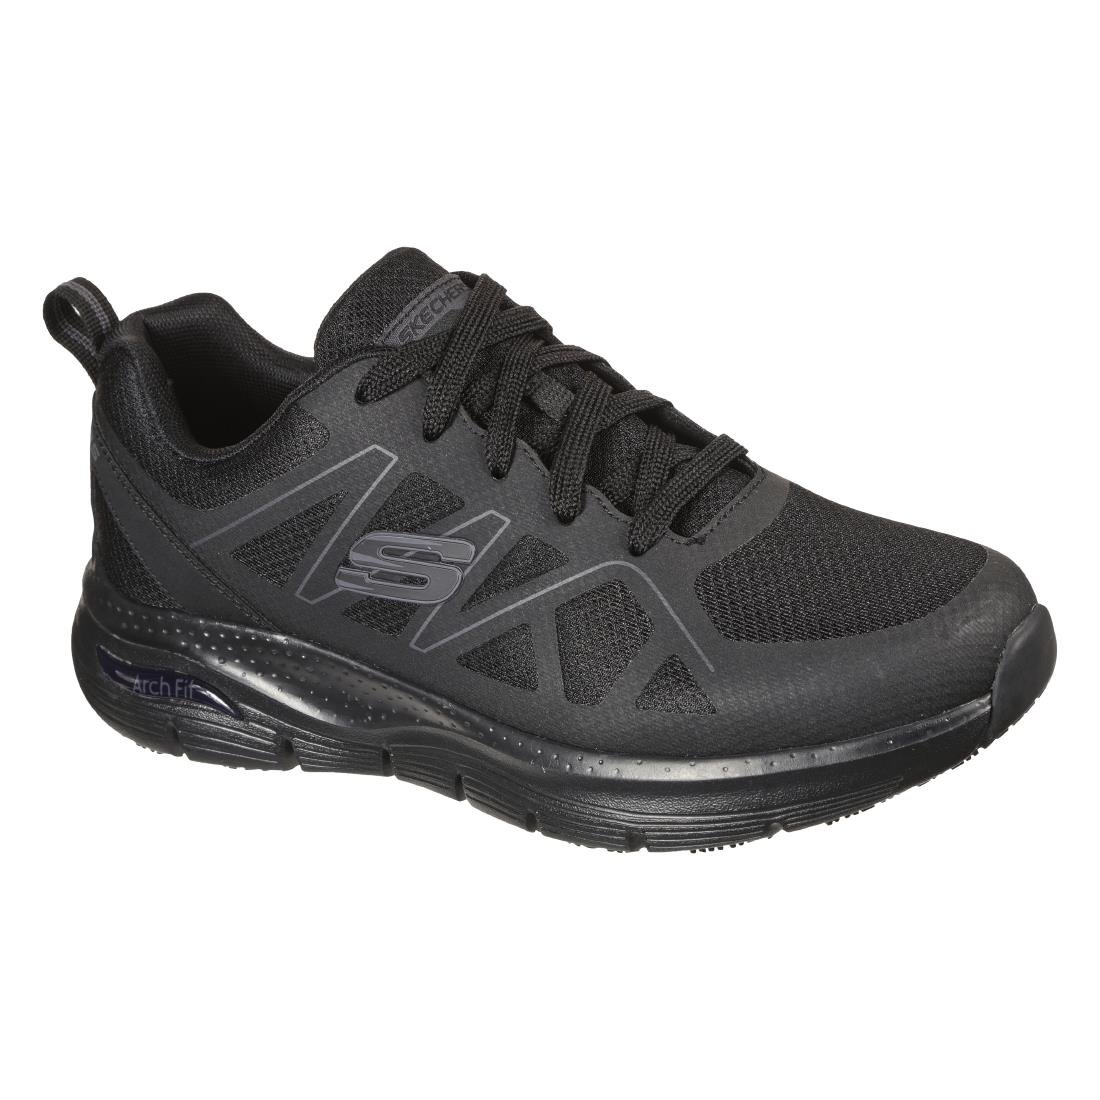 BB673-45 Skechers Axtell Slip Resistant Arch Fit Trainer Size 45 JD Catering Equipment Solutions Ltd